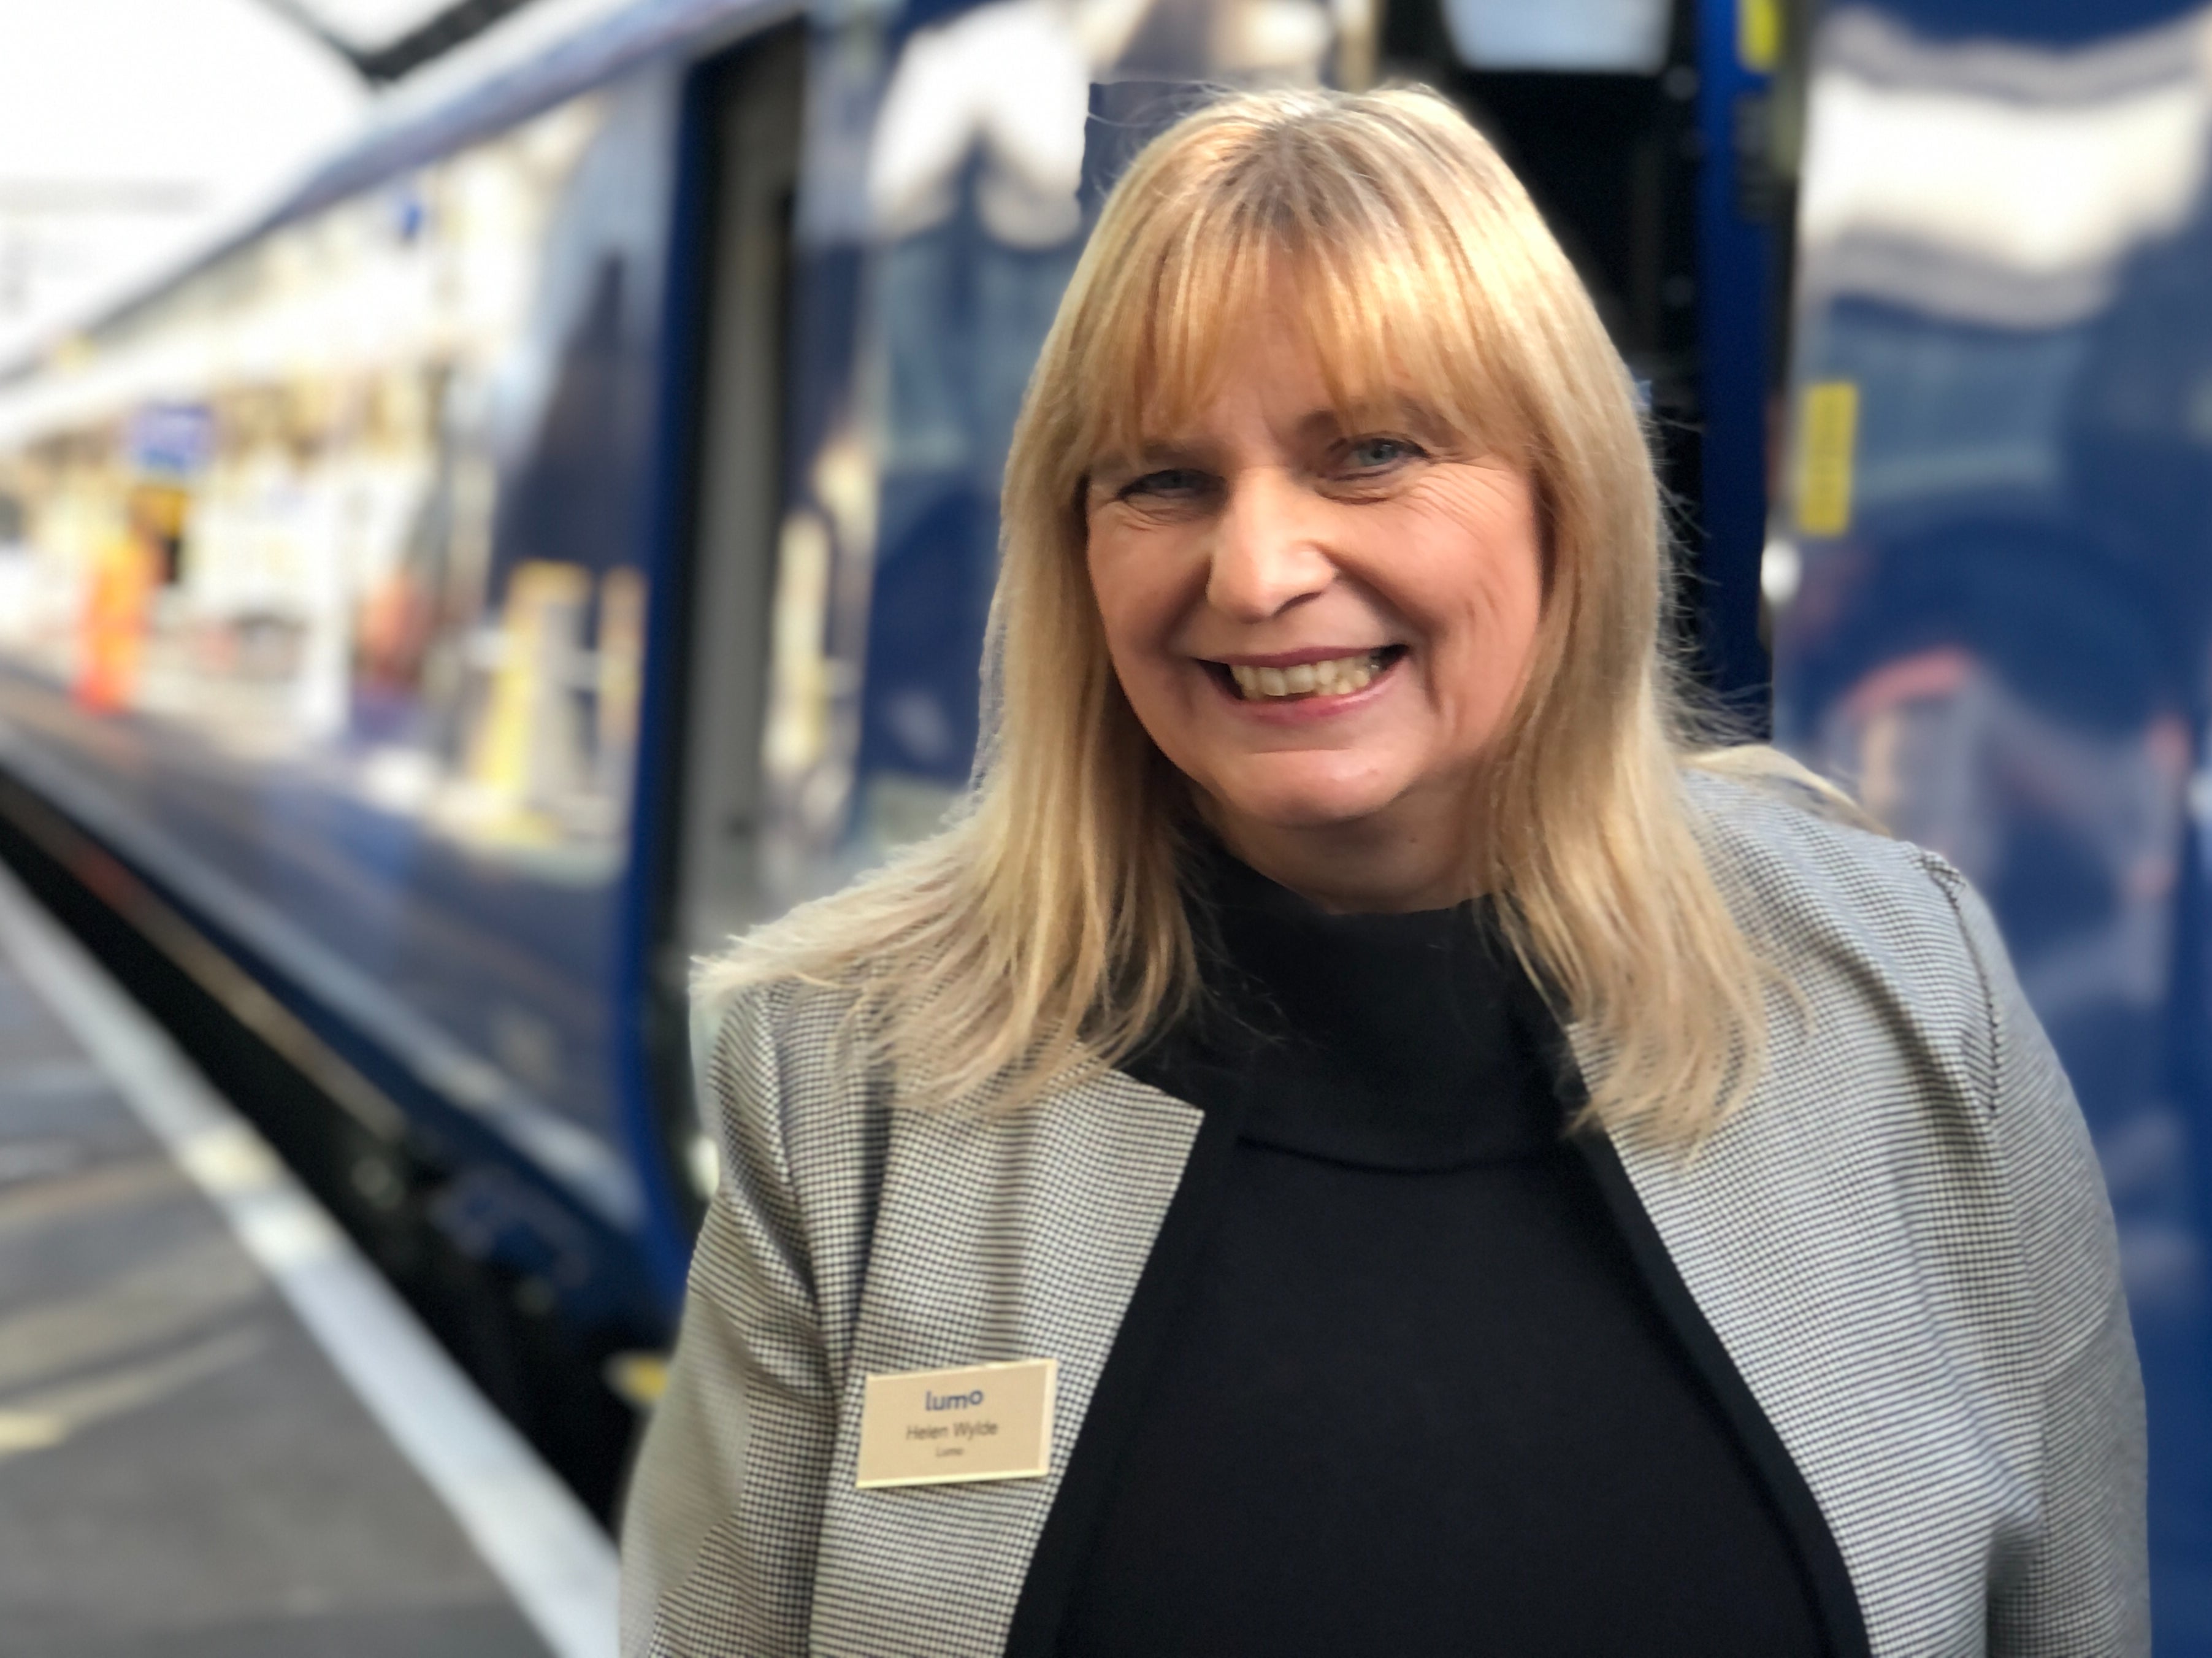 First mover: Helen Wylde, managing director of Lumo, awaiting the departure of the maiden journey from London King’s Cross to Edinburgh Waverley